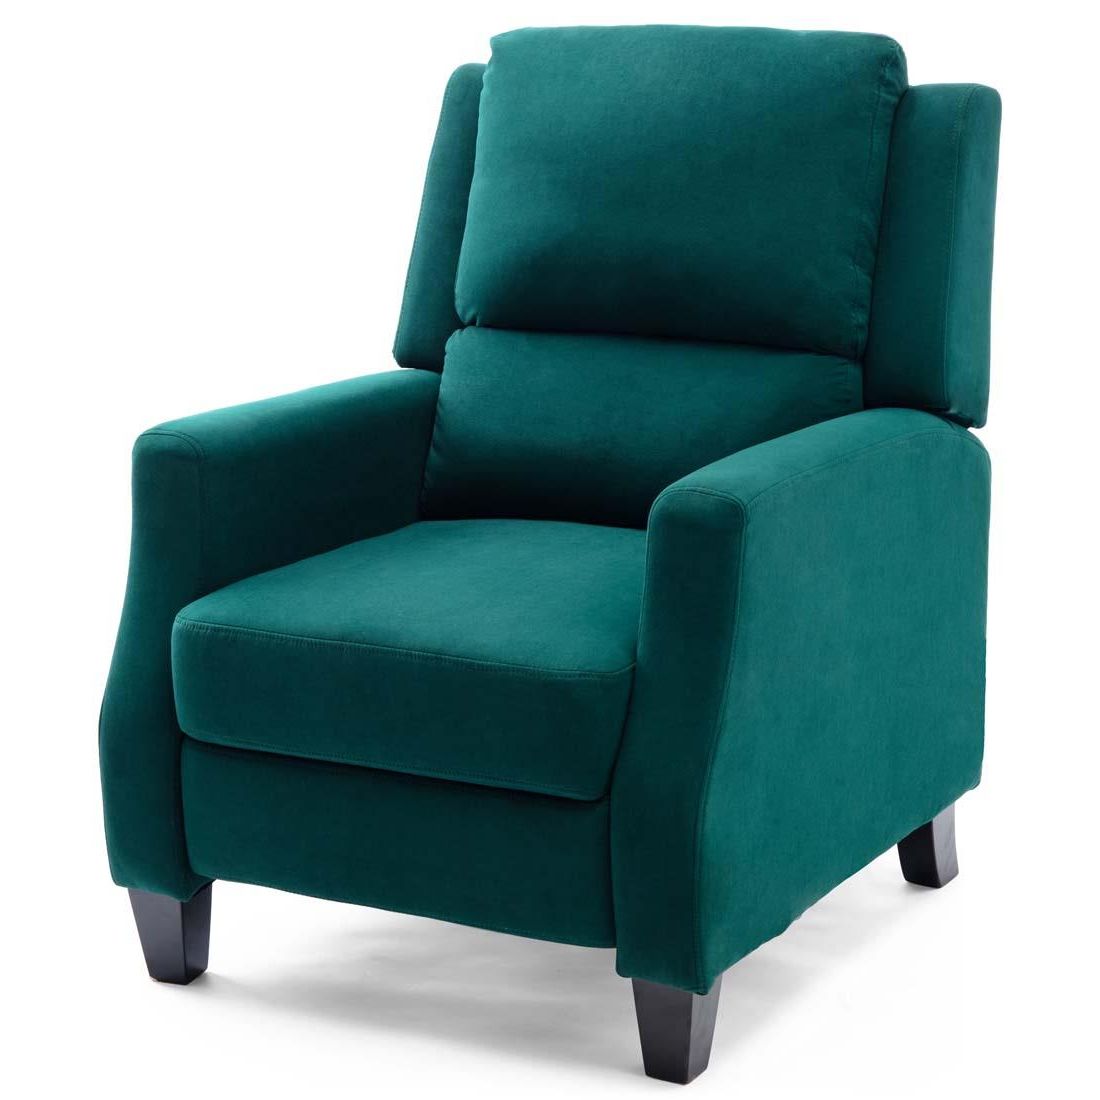 2017 Burley Velvet Fabric Modern Accent Recliner Armchair Sofa Lounge Chair Throughout Modern Velvet Upholstered Recliner Chairs (View 12 of 15)